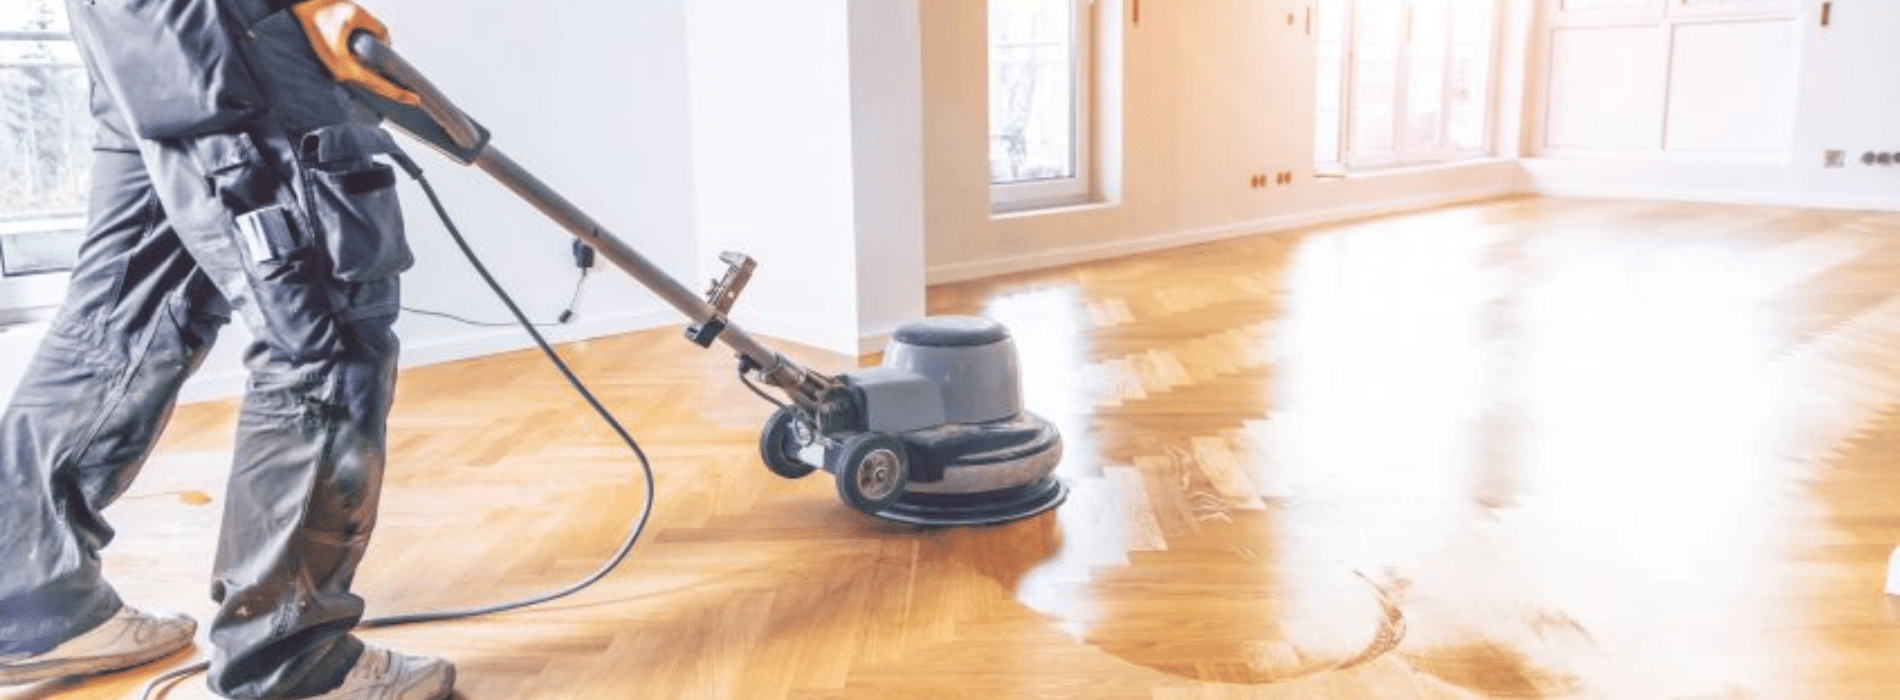 In Hayes, UB3, Mr Sander® are using a Bona FlexiSand 1.5, a powerful floor buffer sander with a Ø 407 mm dimension and 1.5 kW effect. Operating at 230V and 50 Hz/60 Hz, it's connected to a dust extraction system equipped with a HEPA filter for optimal cleanliness and efficiency during the sanding of a parquet floor.